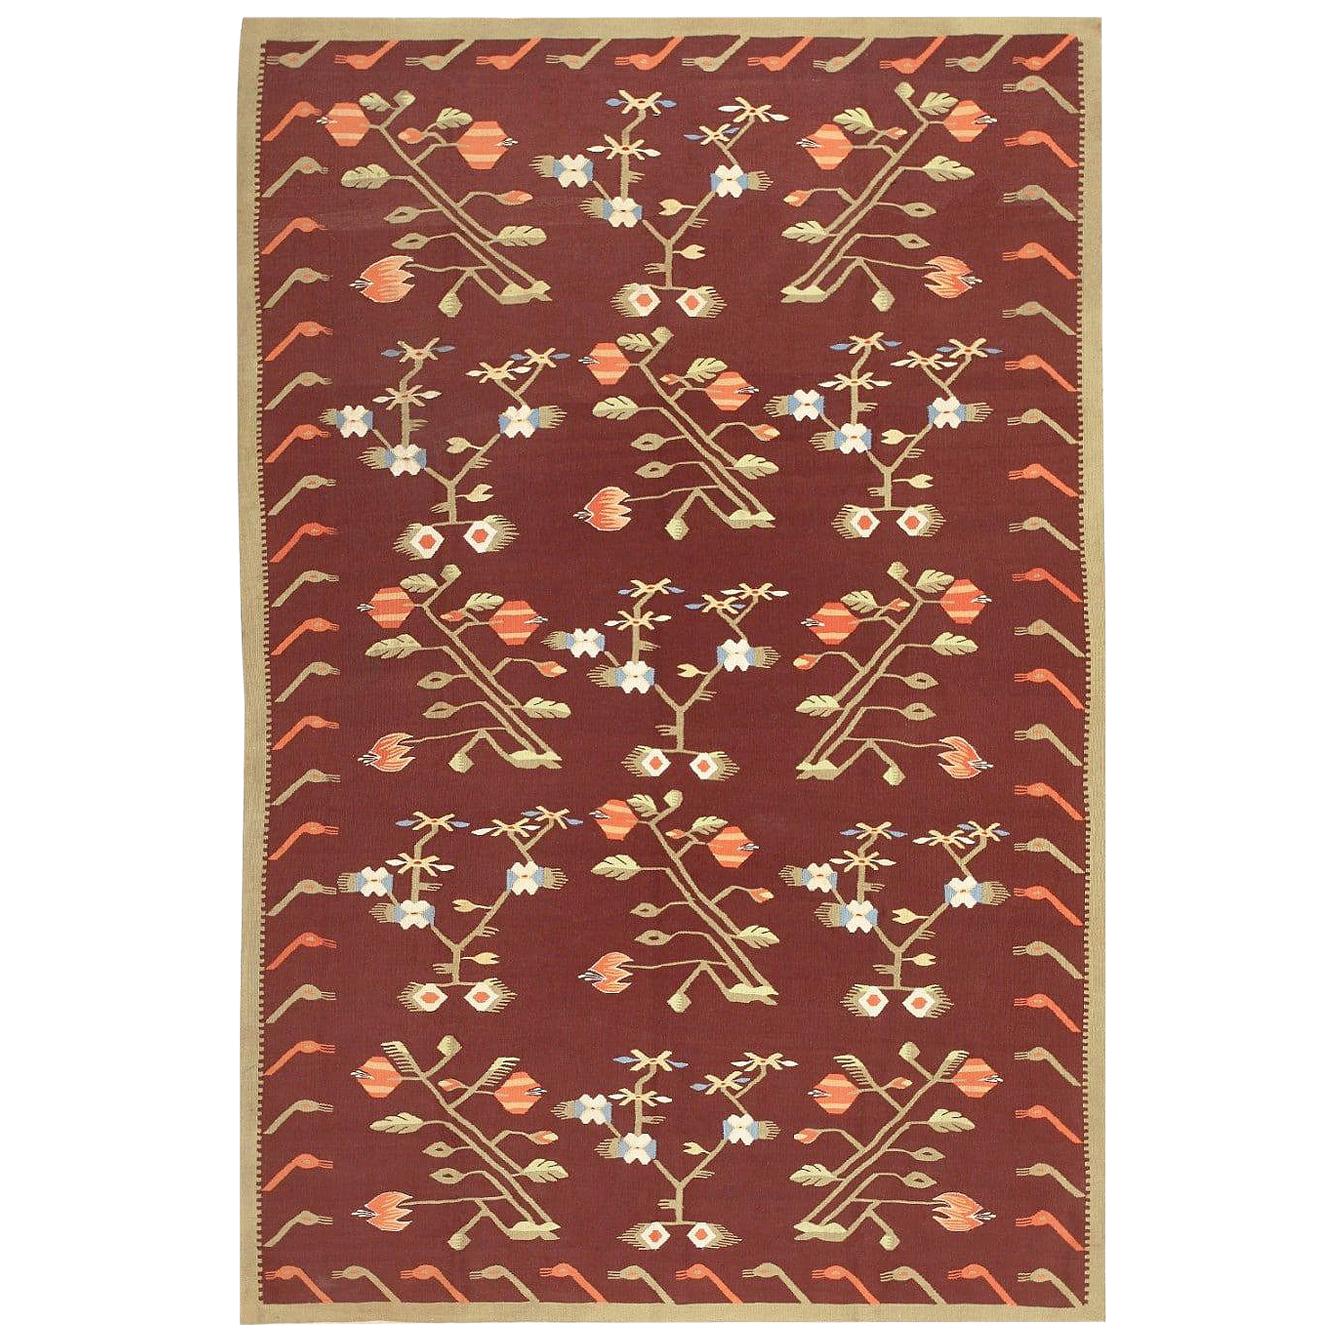 Vintage Flat-Woven Bessarabian Kilim Rug. Size: 5 ft 8 in x 8 ft 6 in